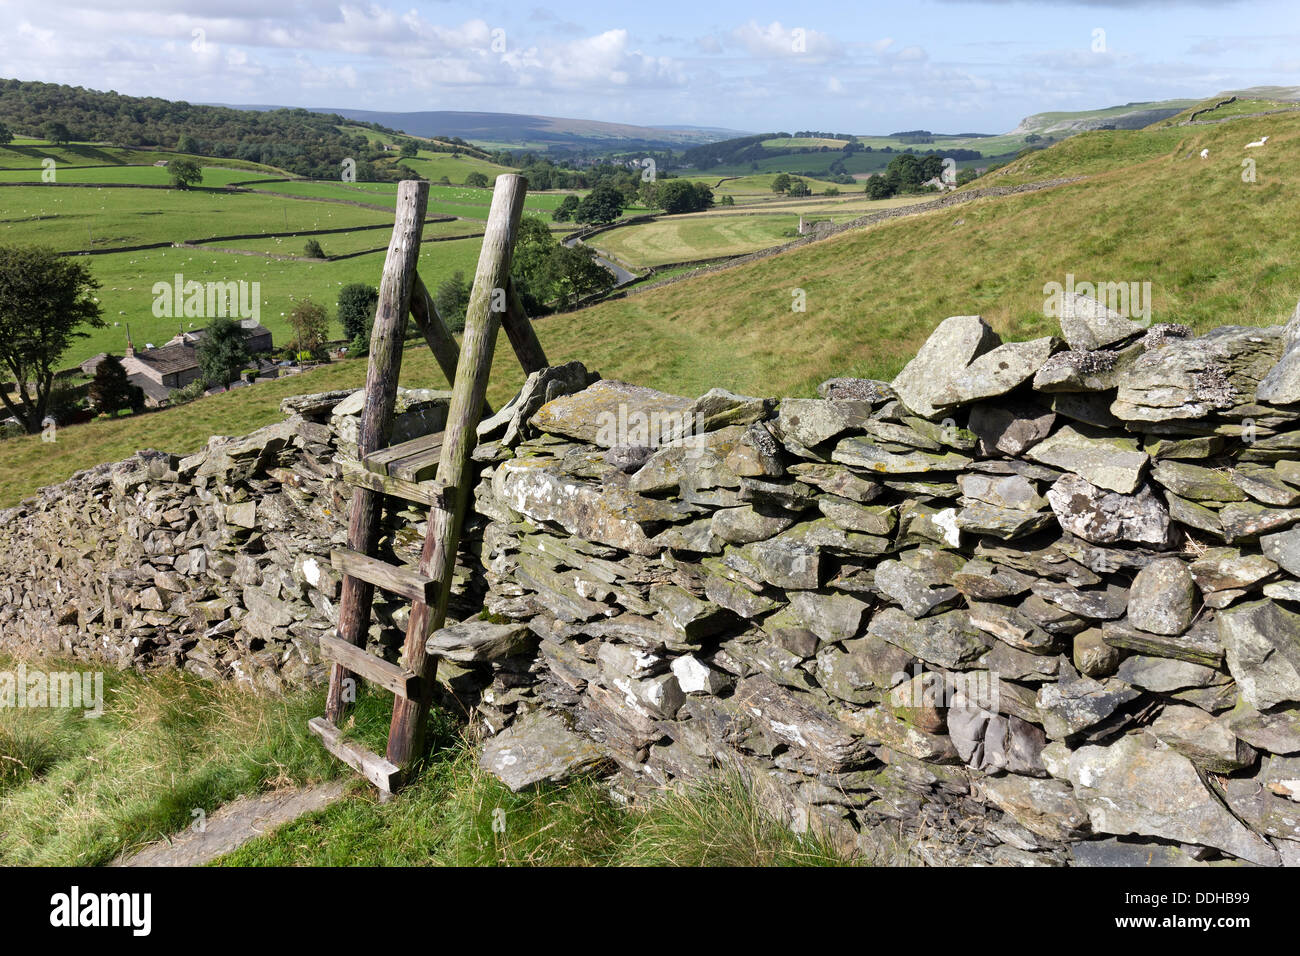 The View Towards Austwick from the Footpath on Moughton Nab Yorkshire Dales UK Stock Photo